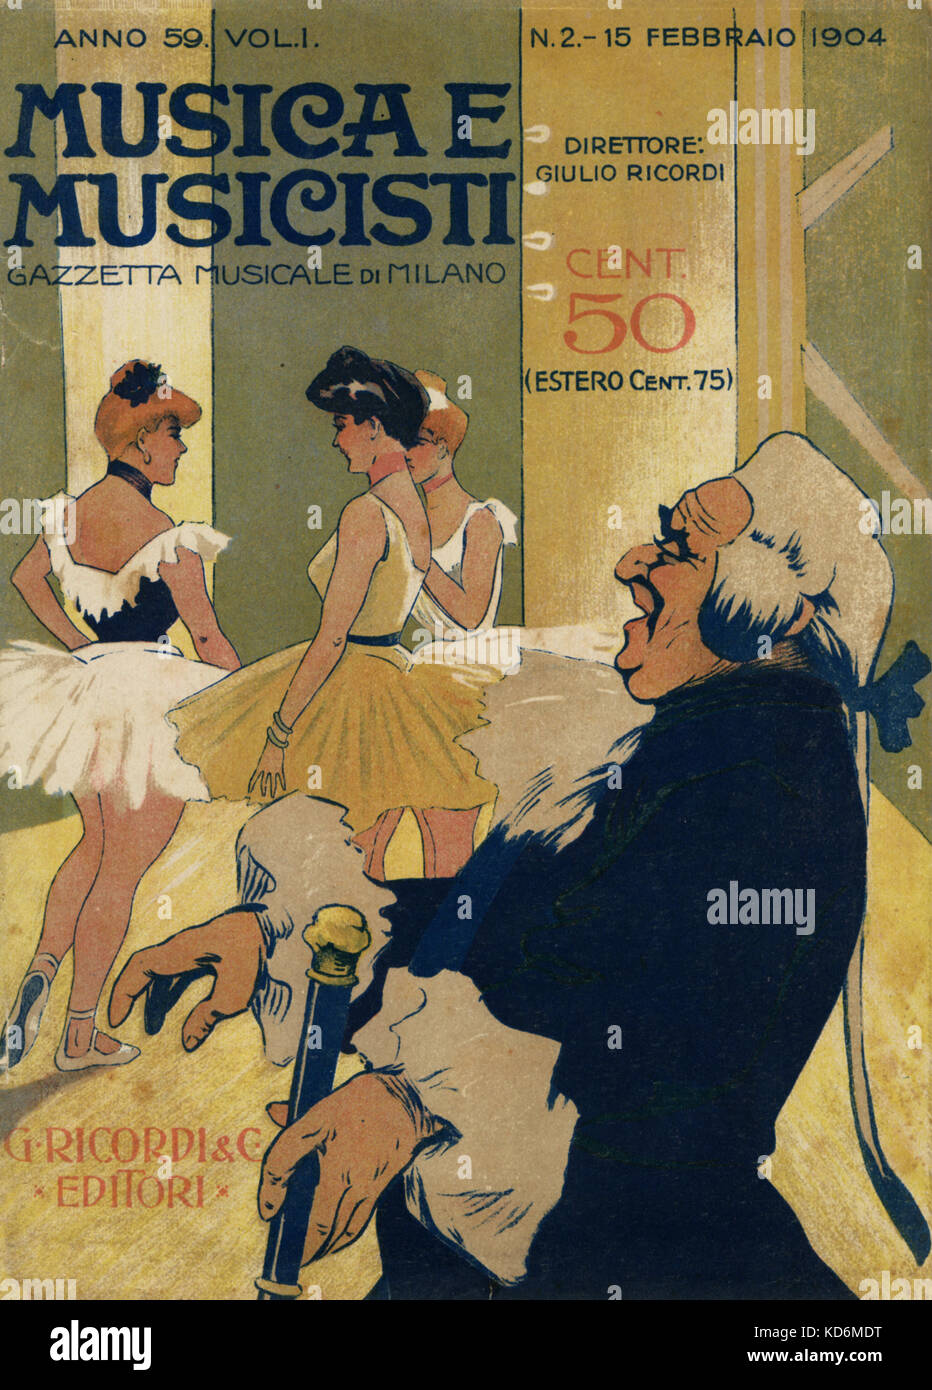 Musica e Musicisti '  Cover of turn of 20th century Italian music magazine,  , the musical gazette of Milan, featuring three ballerinas in typical 1900s style,  with ballet master. Stock Photo